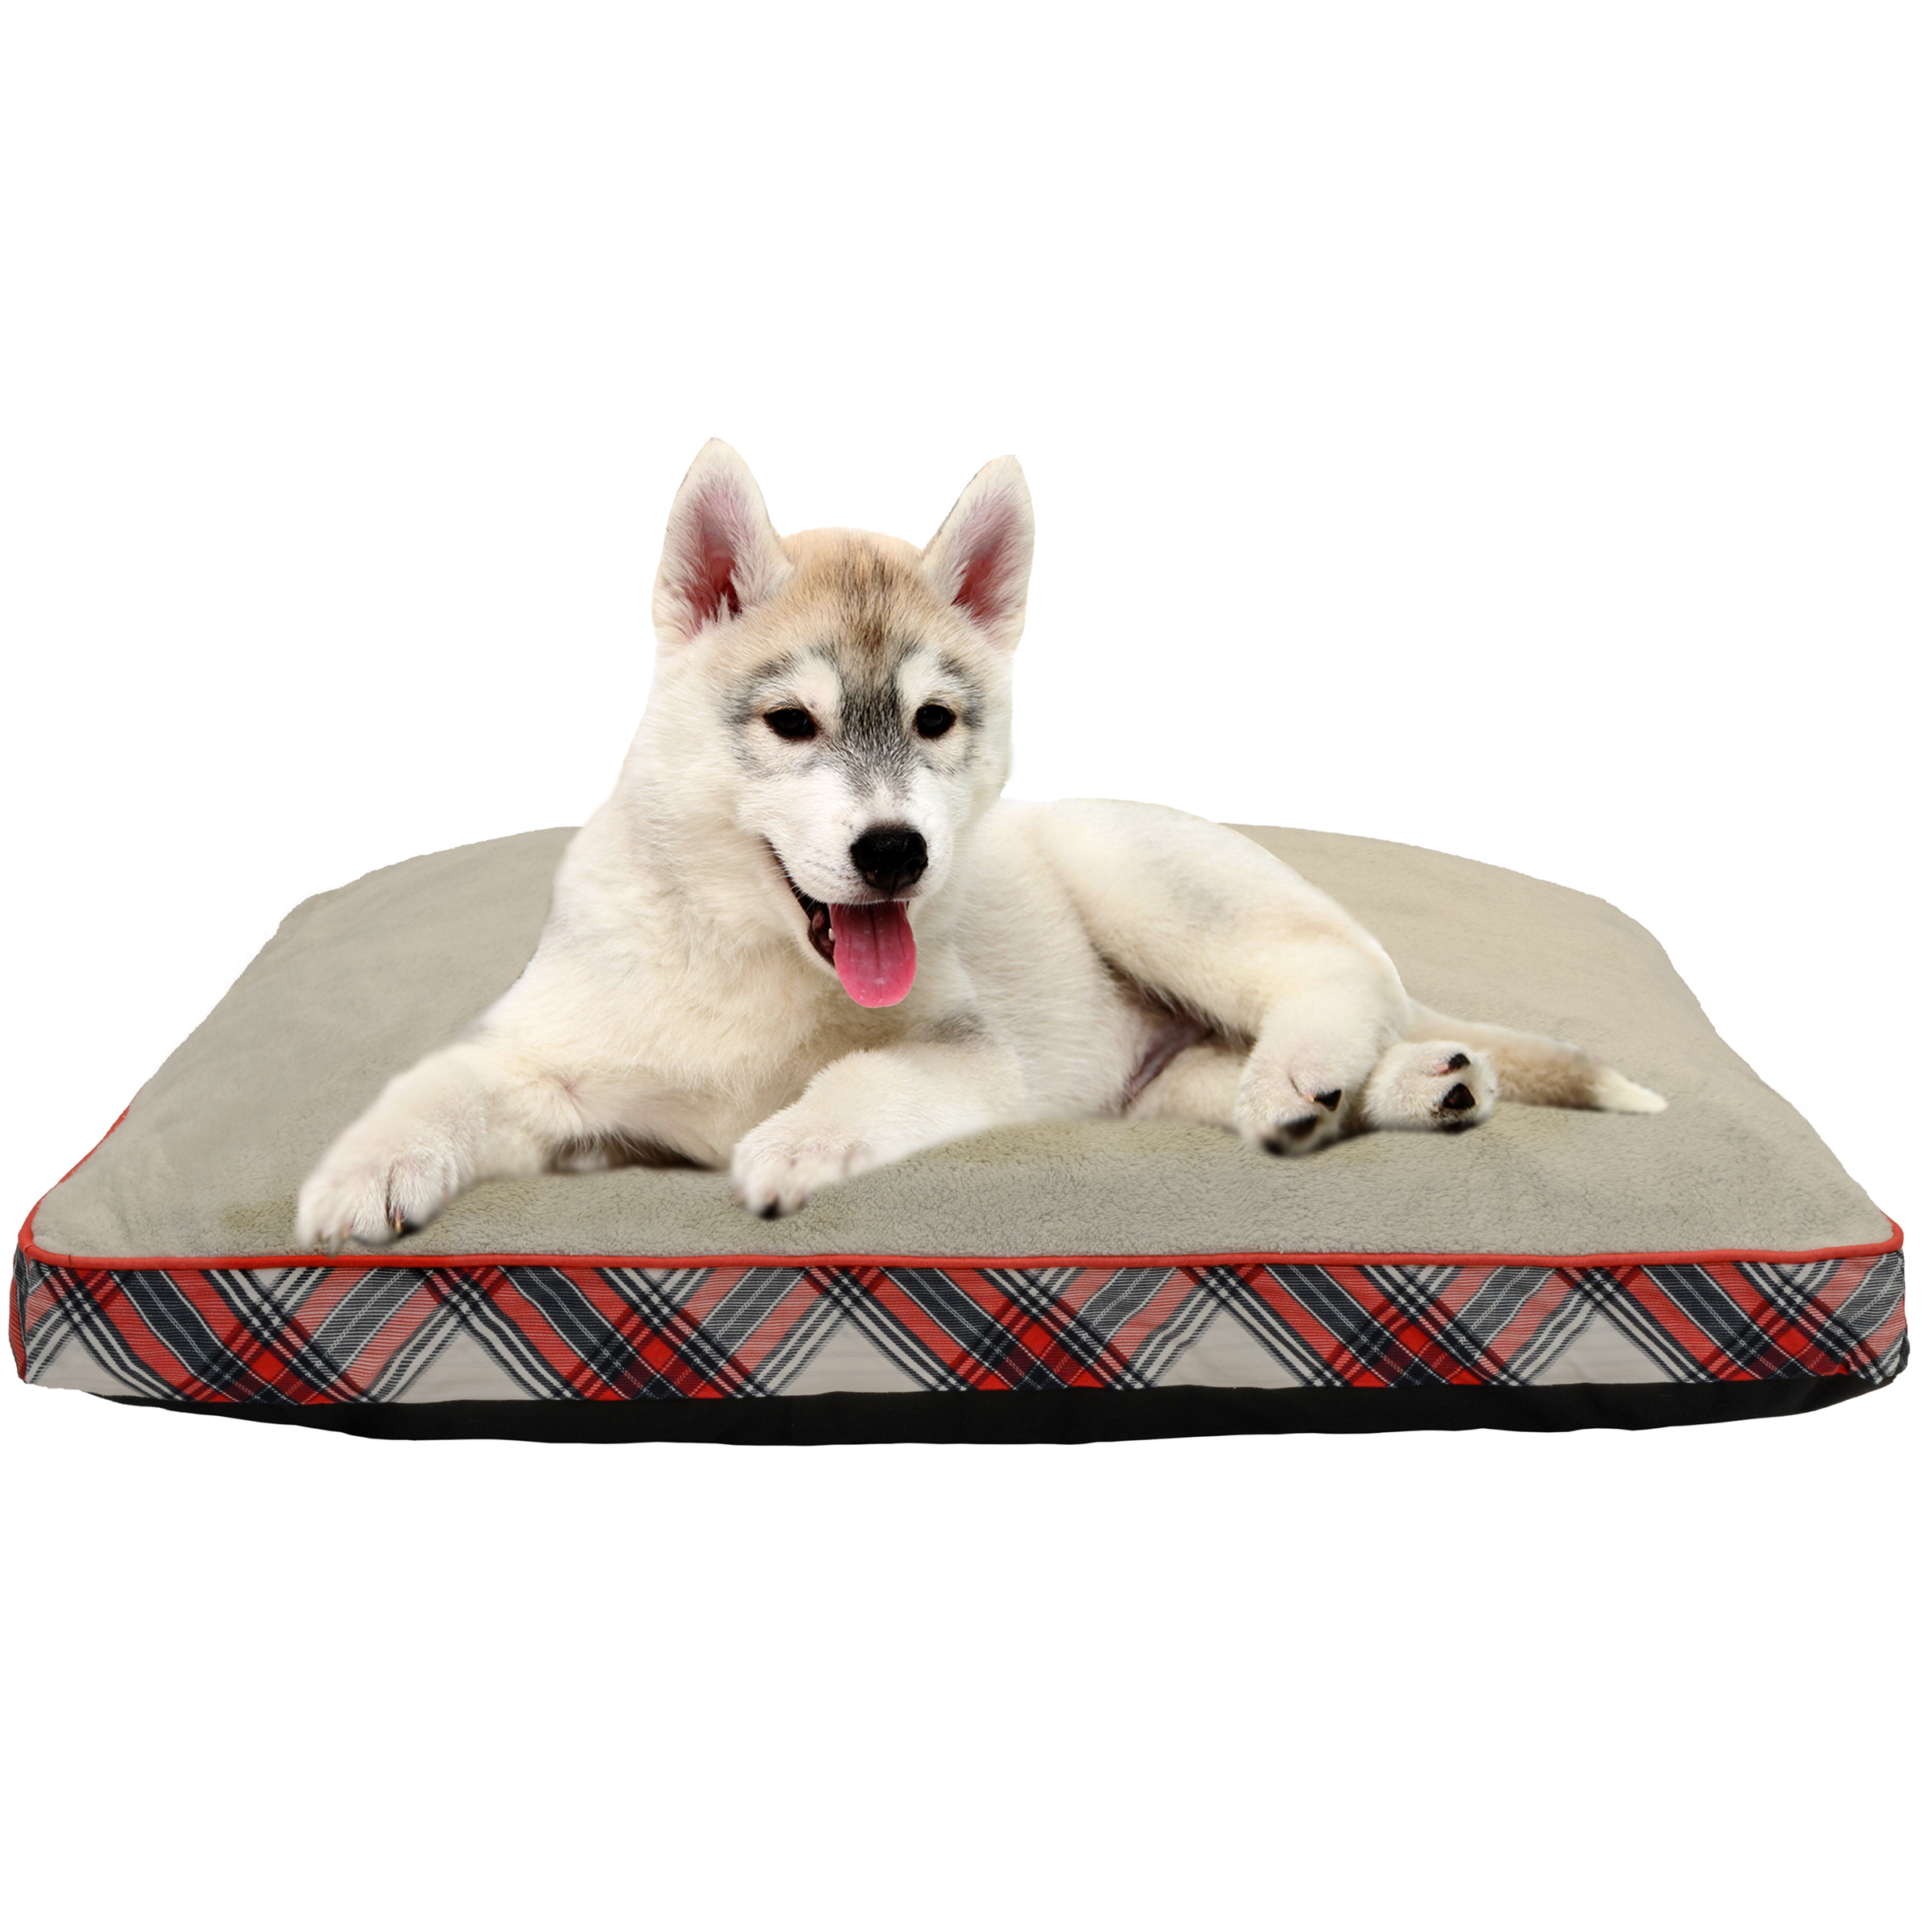 Holiday Time Gusseted Pet Bed, X-Large, 32"x 42", Red/Tan - image 3 of 5